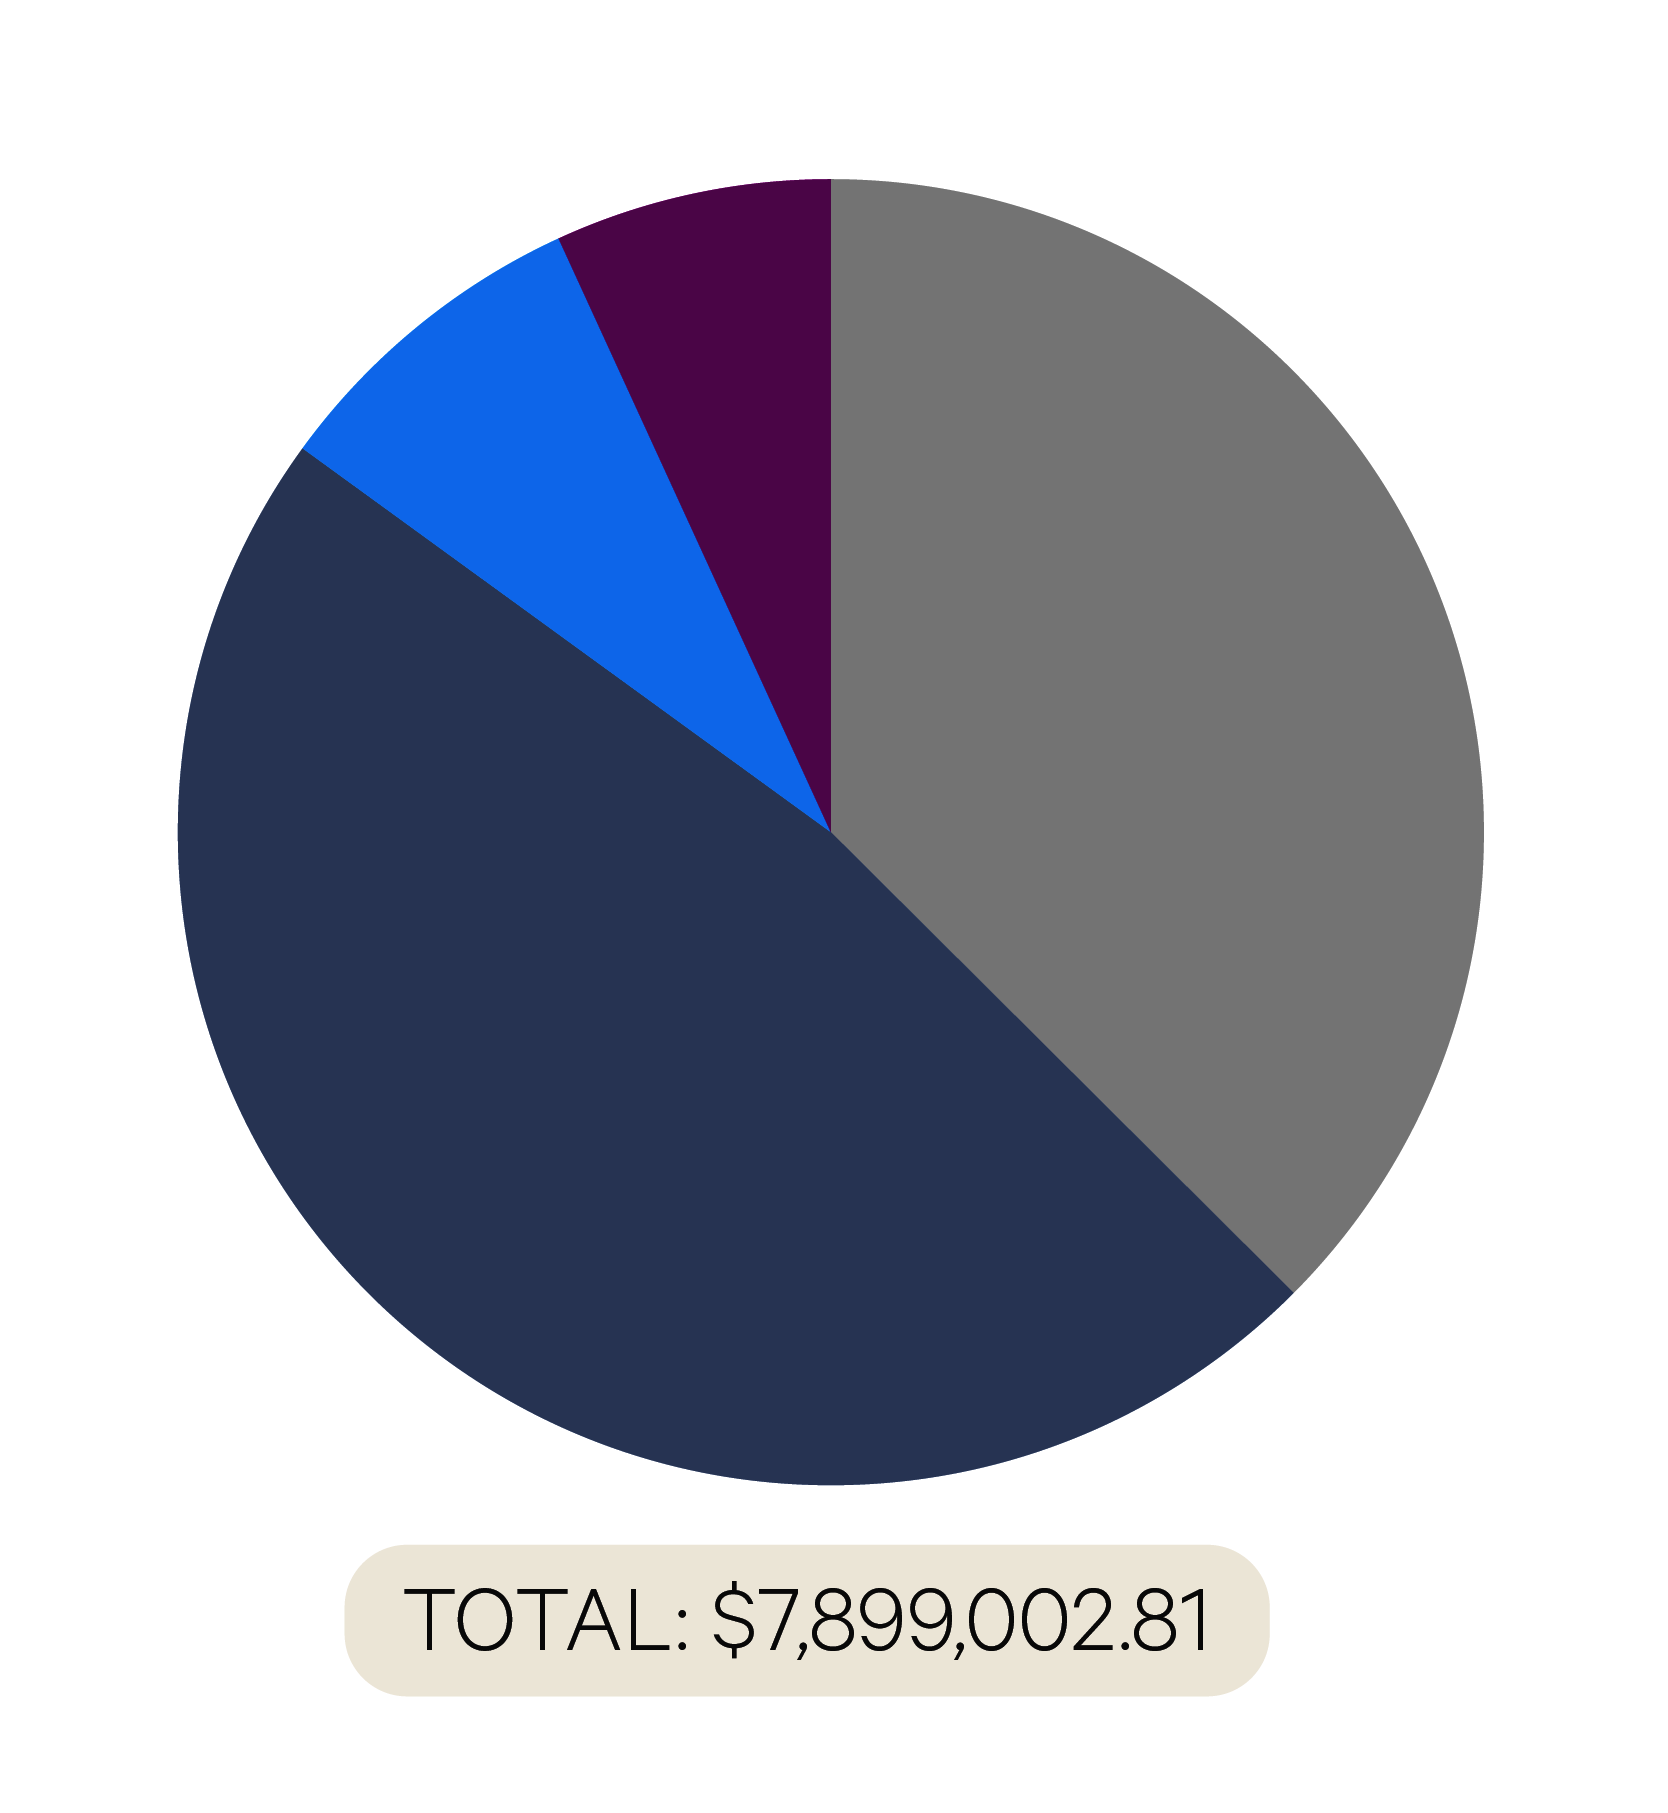 Pie chart with large sections of gray, smaller sections of light-gray, and even smaller sections of purple and blue. Below the chart reads “TOTAL: $7,899,002.81”. 